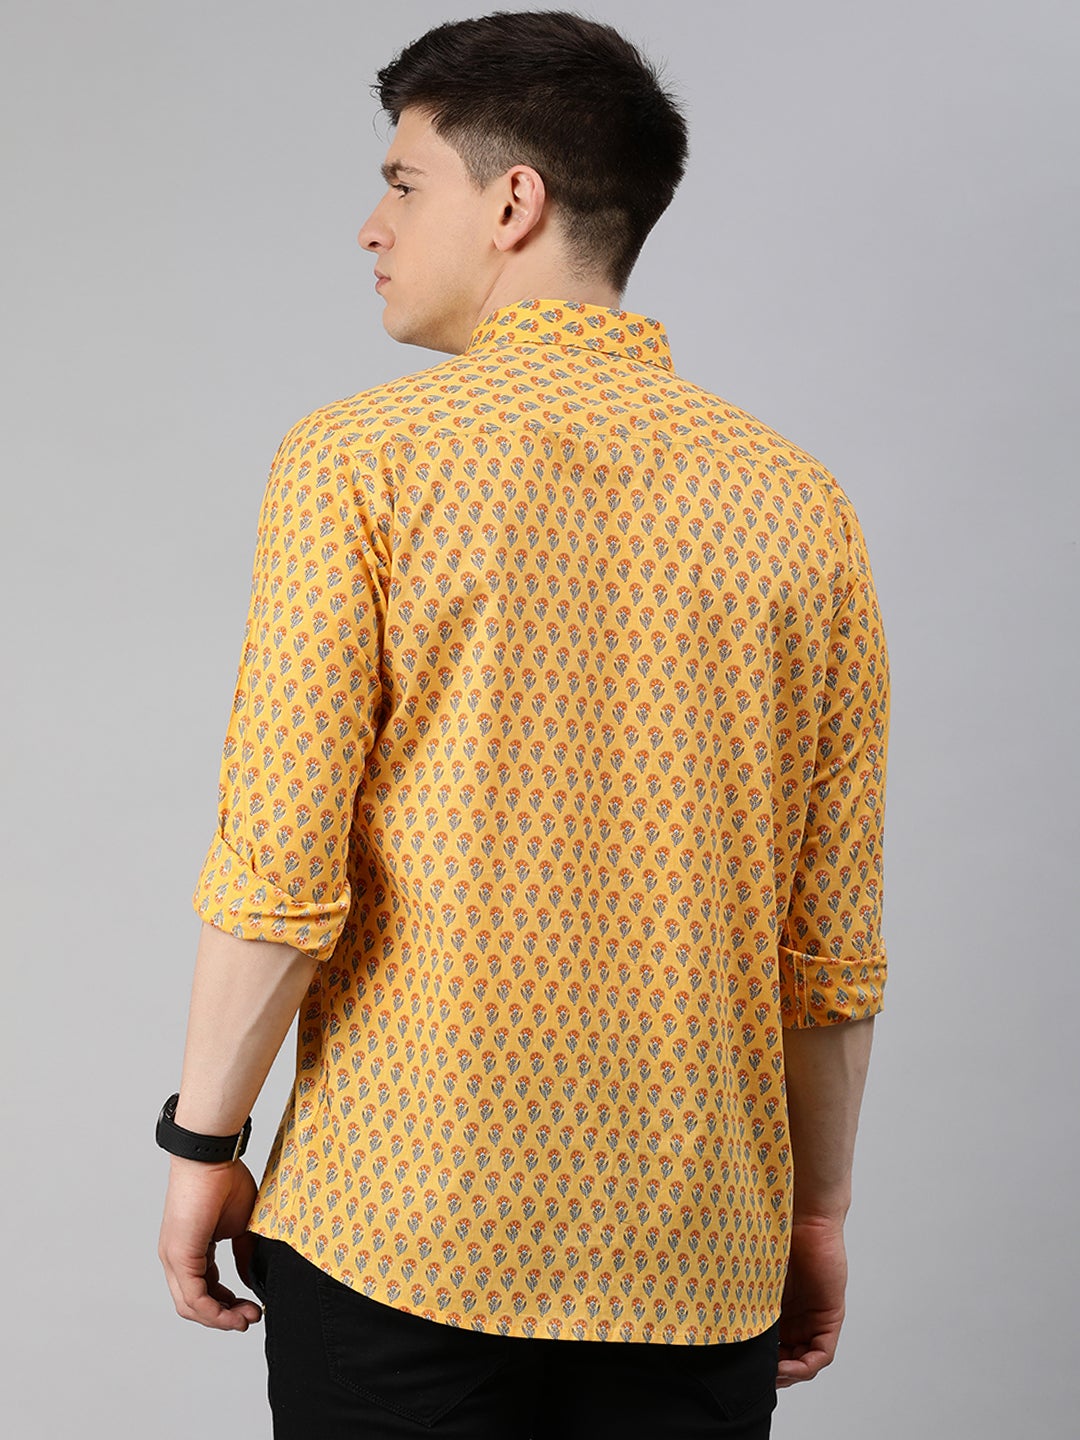 Yellow Cotton Full Sleeves Shirts For Men-MMF0246 - NOZ2TOZ